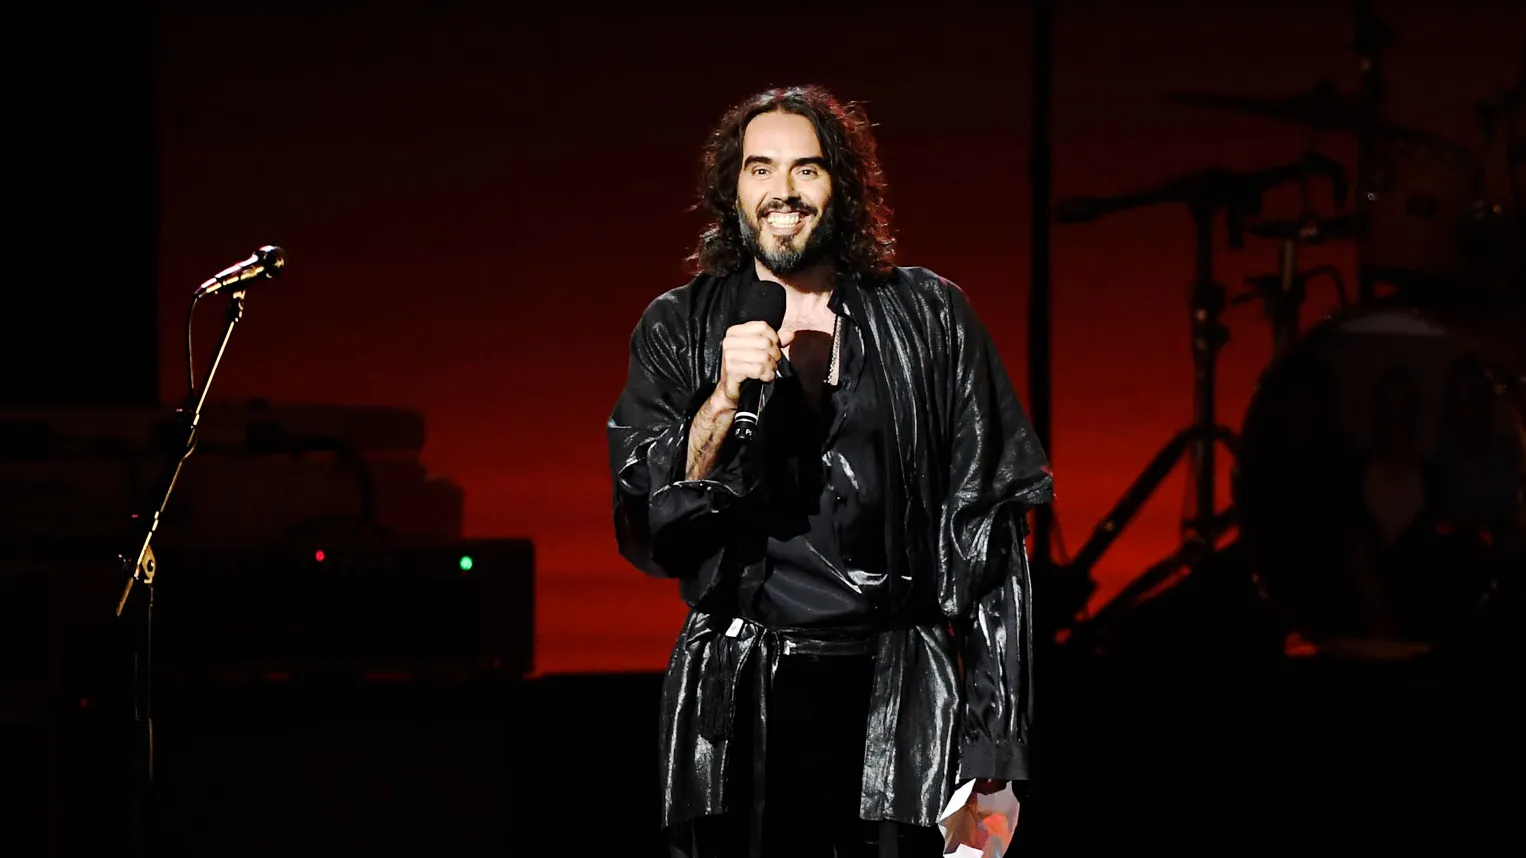 youtube-suspends-russell-brand-from-making-money-on-his-channel-amid-sexual-assault-allegations